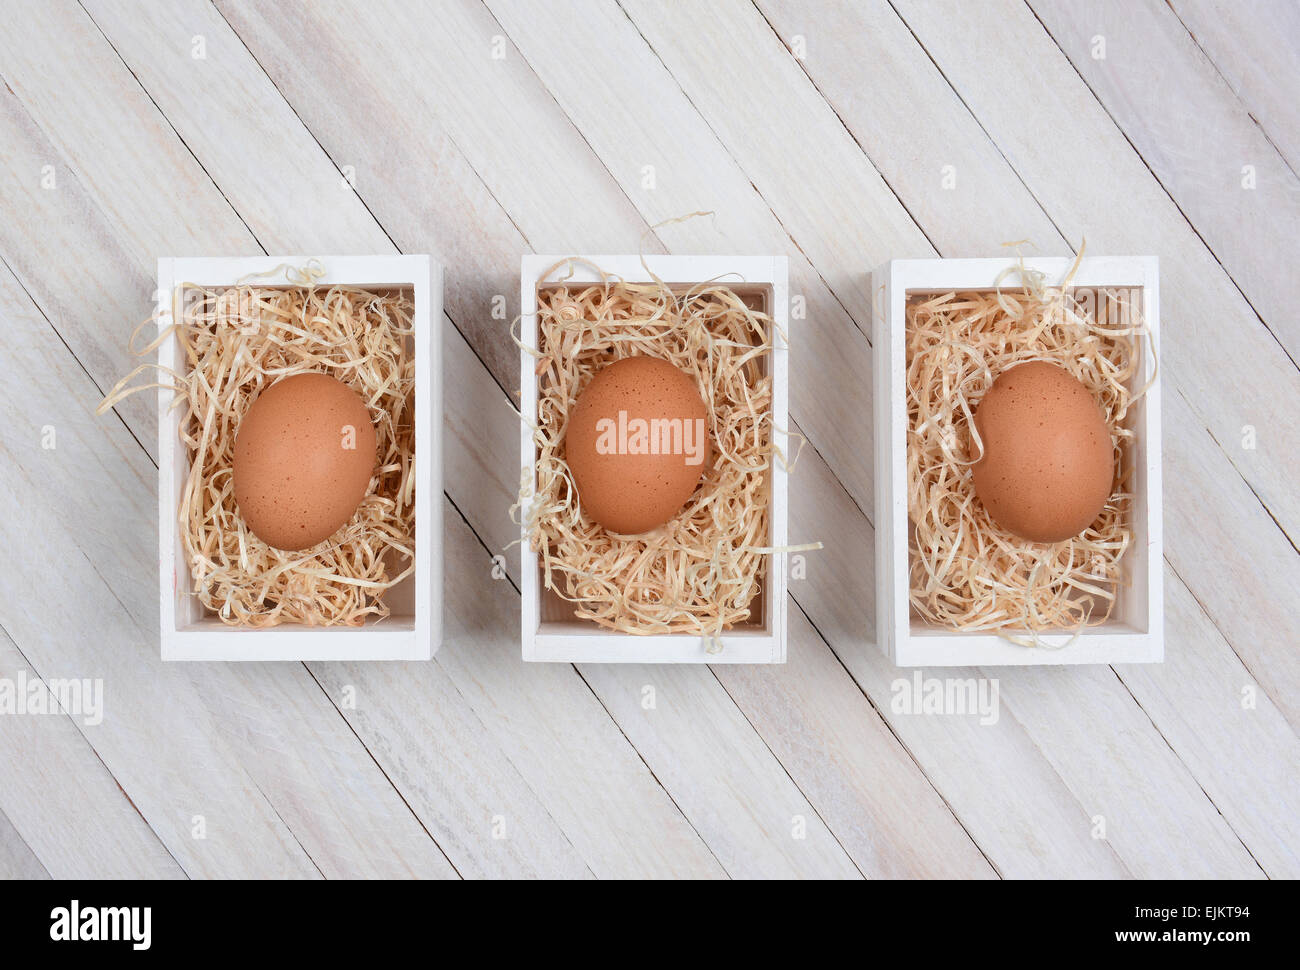 Three brown eggs in wood crates on a whitewashed wood surface. High angle shot in horizontal format. Stock Photo